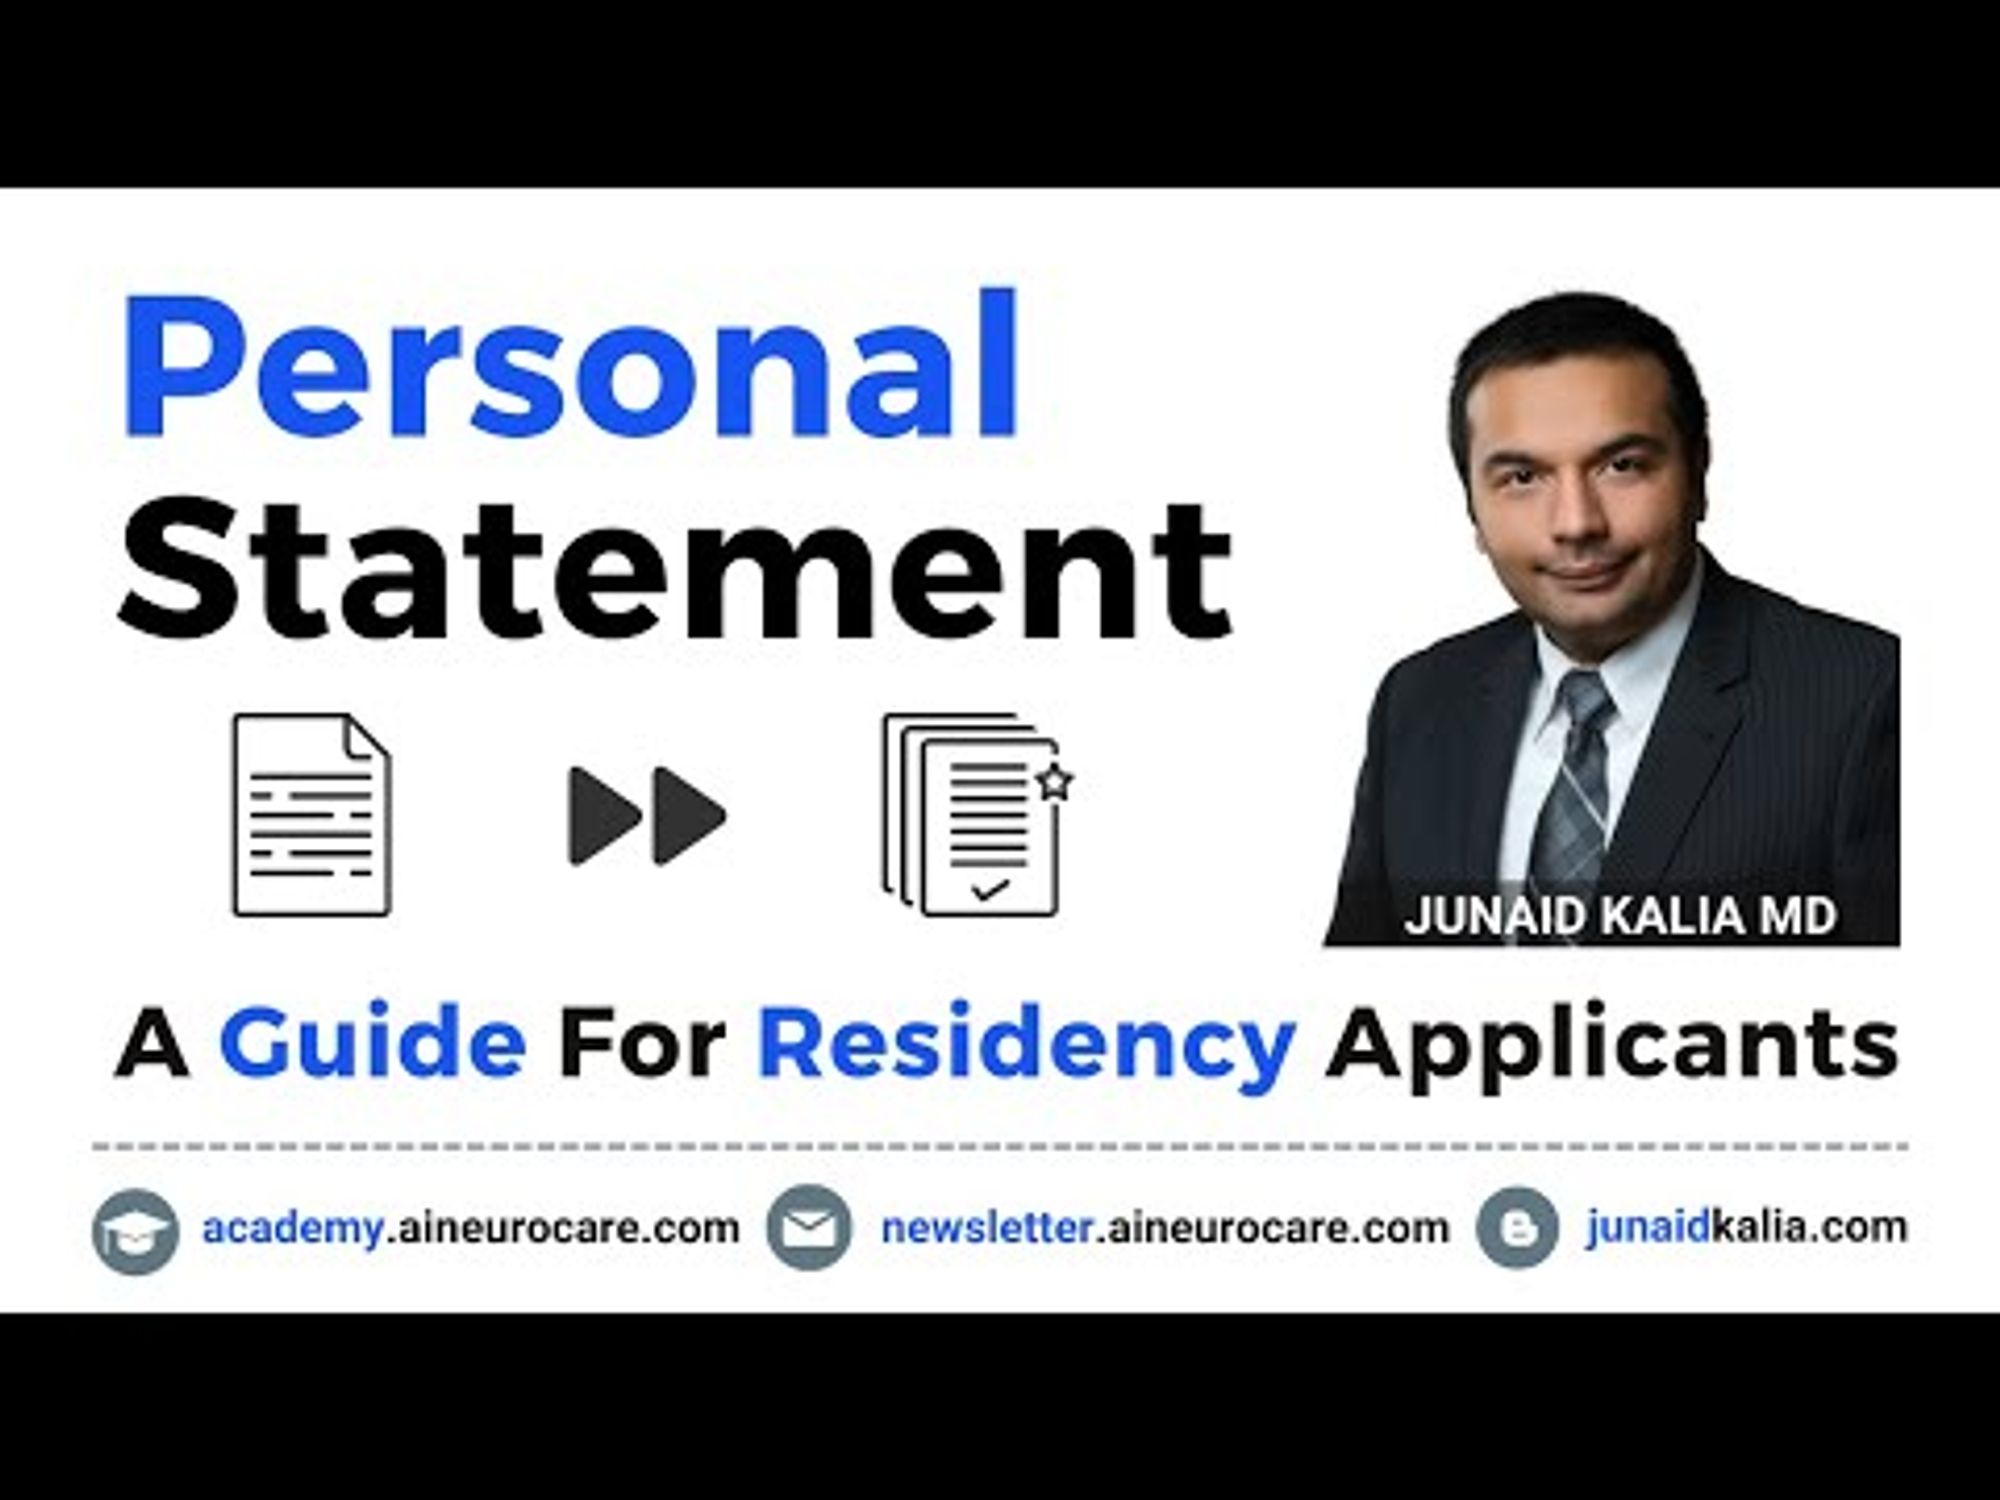 Personal Statement for Residency Applicants | AINeuroCare Academy